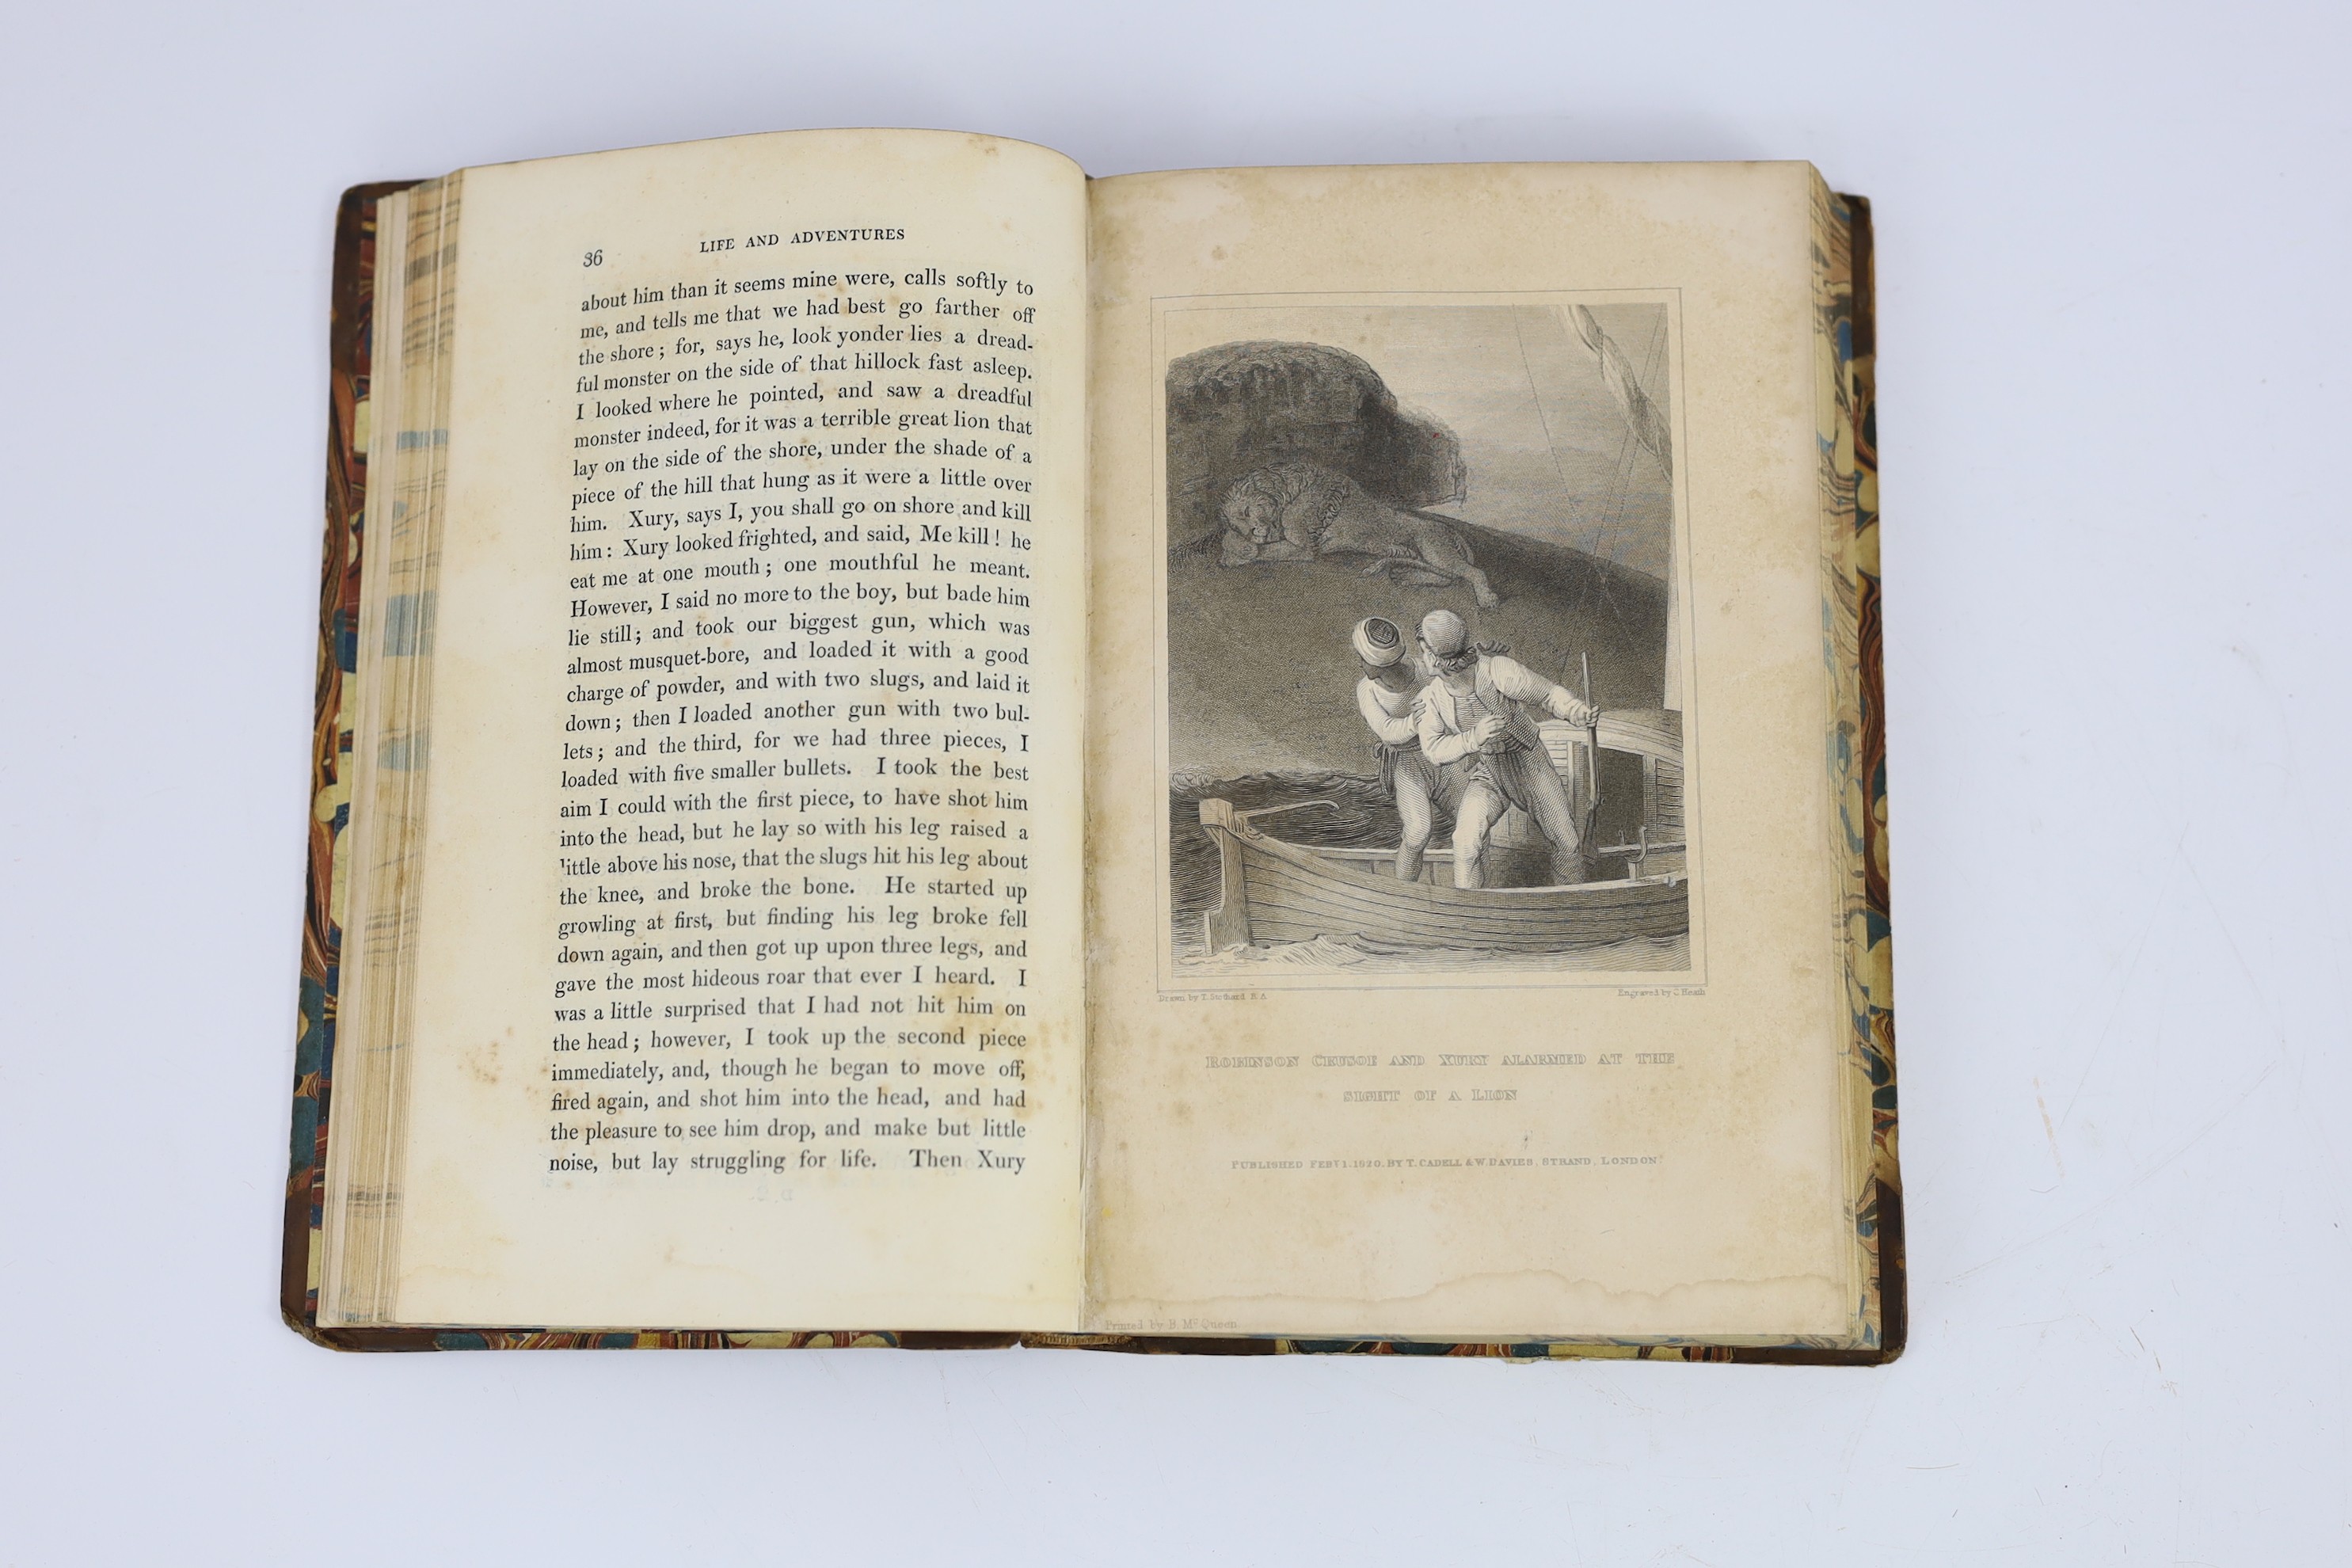 [Defoe, Daniel] The Life and Adventures of Robinson Crusoe ..., 2 vols, pictorial title vignettes and 20 plates (by Thomas Stothard); contemp. gilt half calf and marbled boards, panelled spines, marbled edges and e/ps. p